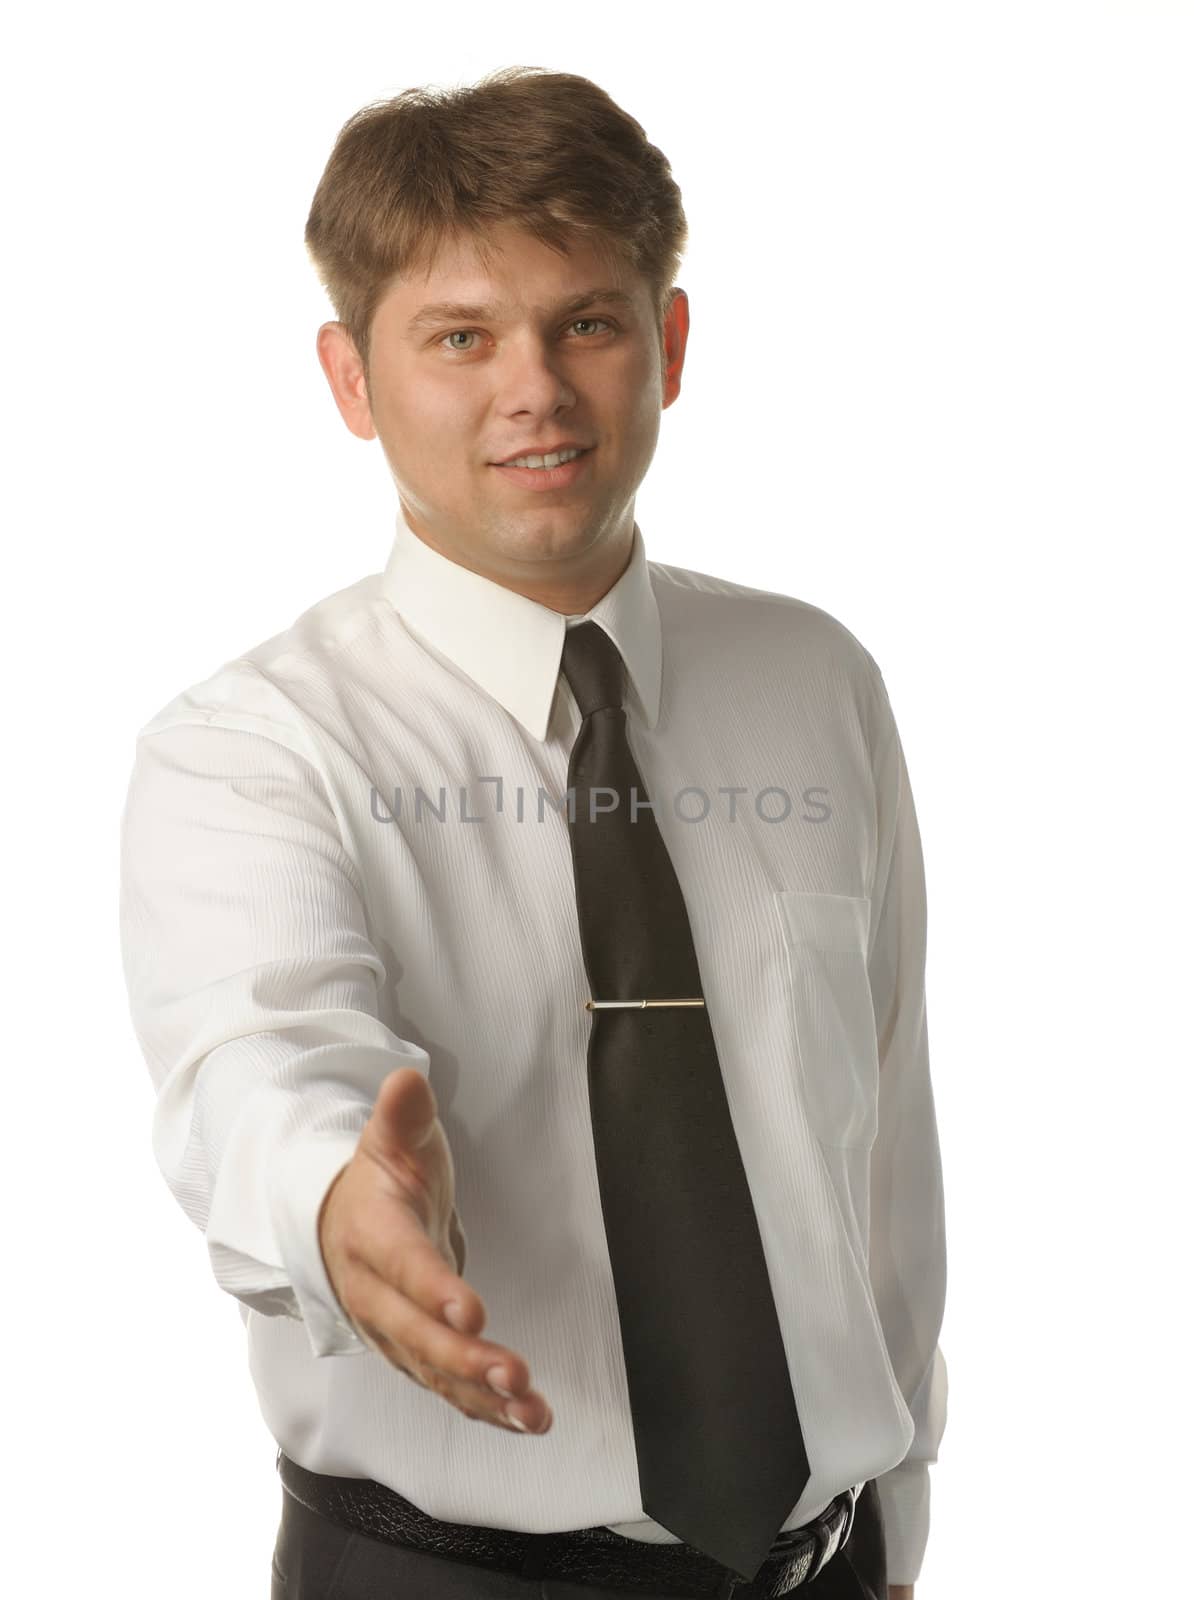 Hand shake of the young businessman. It is isolated on a white background